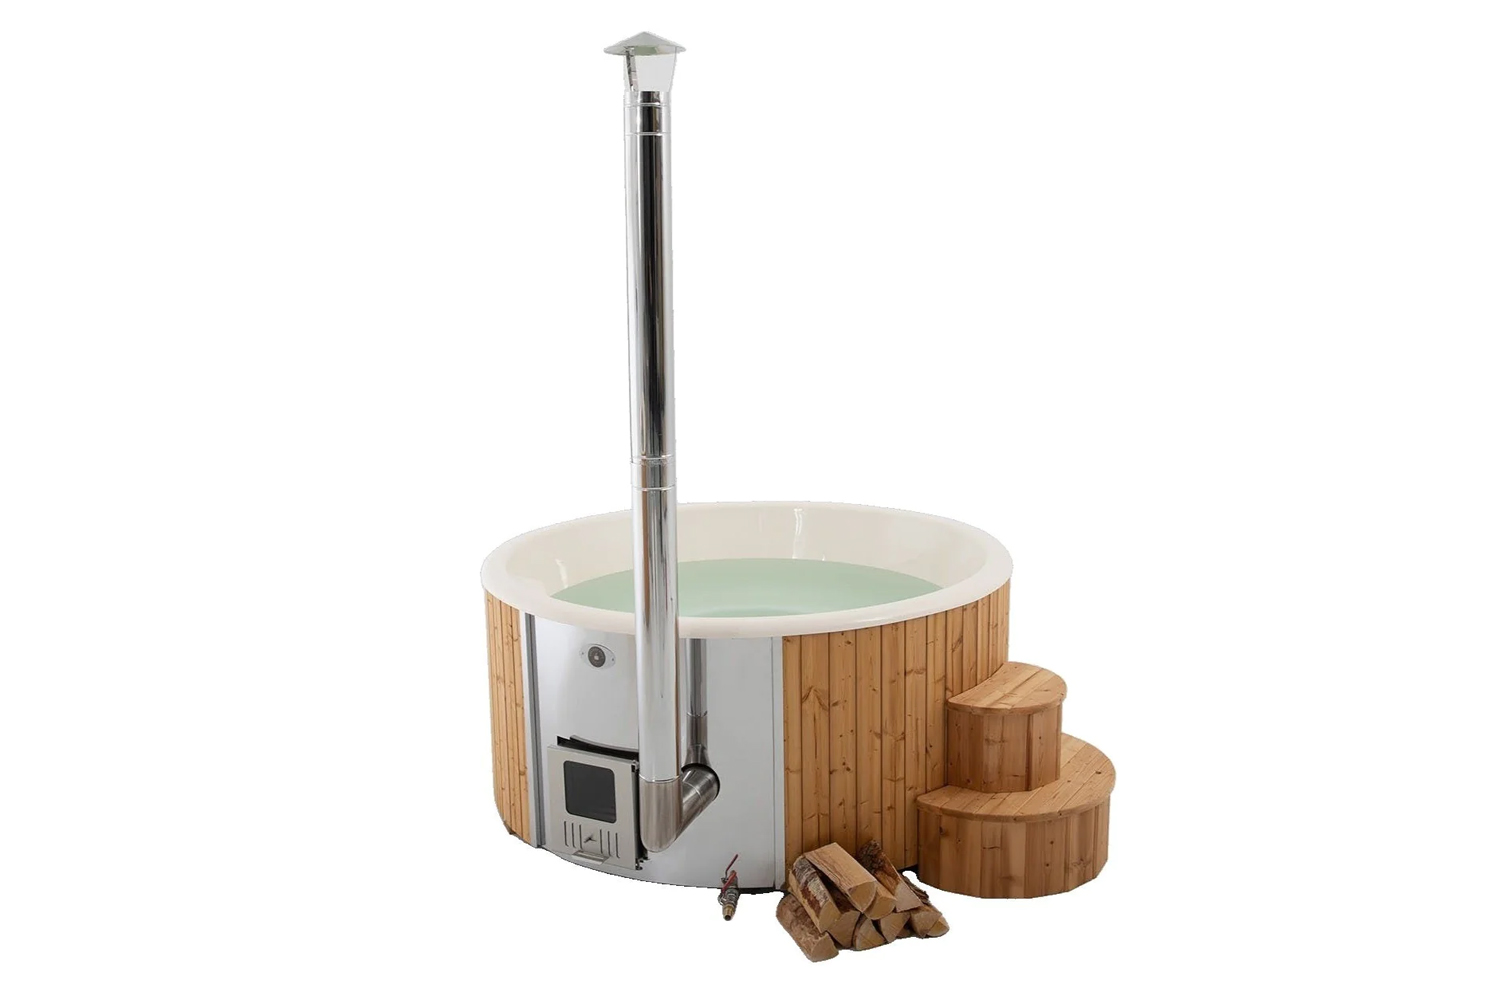 the deluxe wood fired hot tub is lined with a fiberglass tub; \$5,96\1 from bac 12